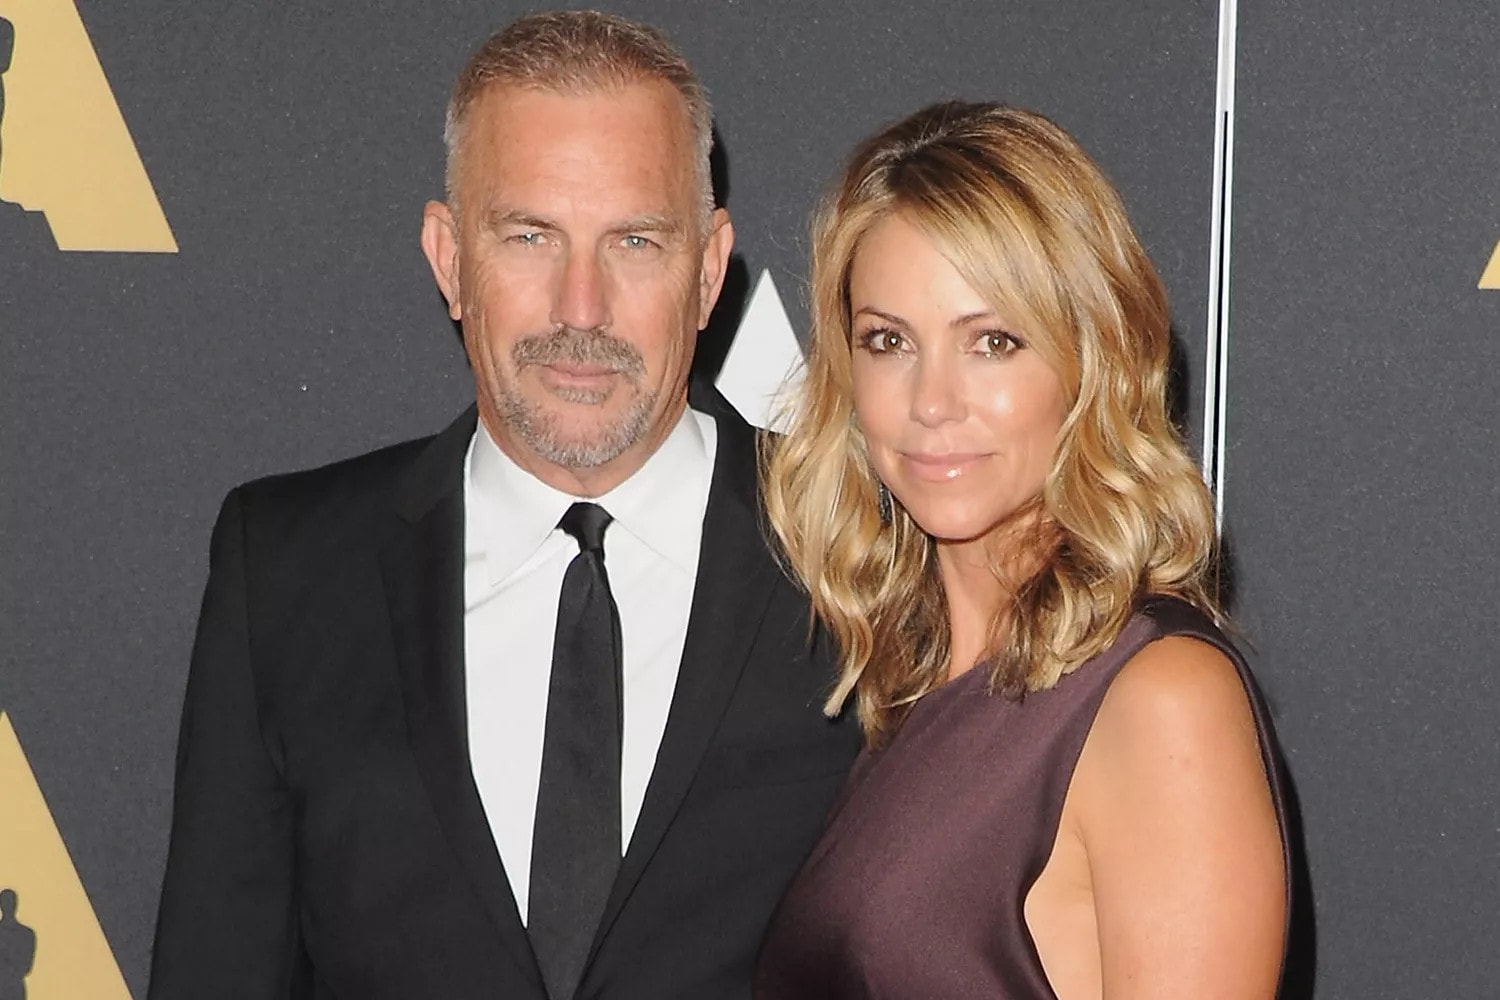 Kevin Costner and wife Christine